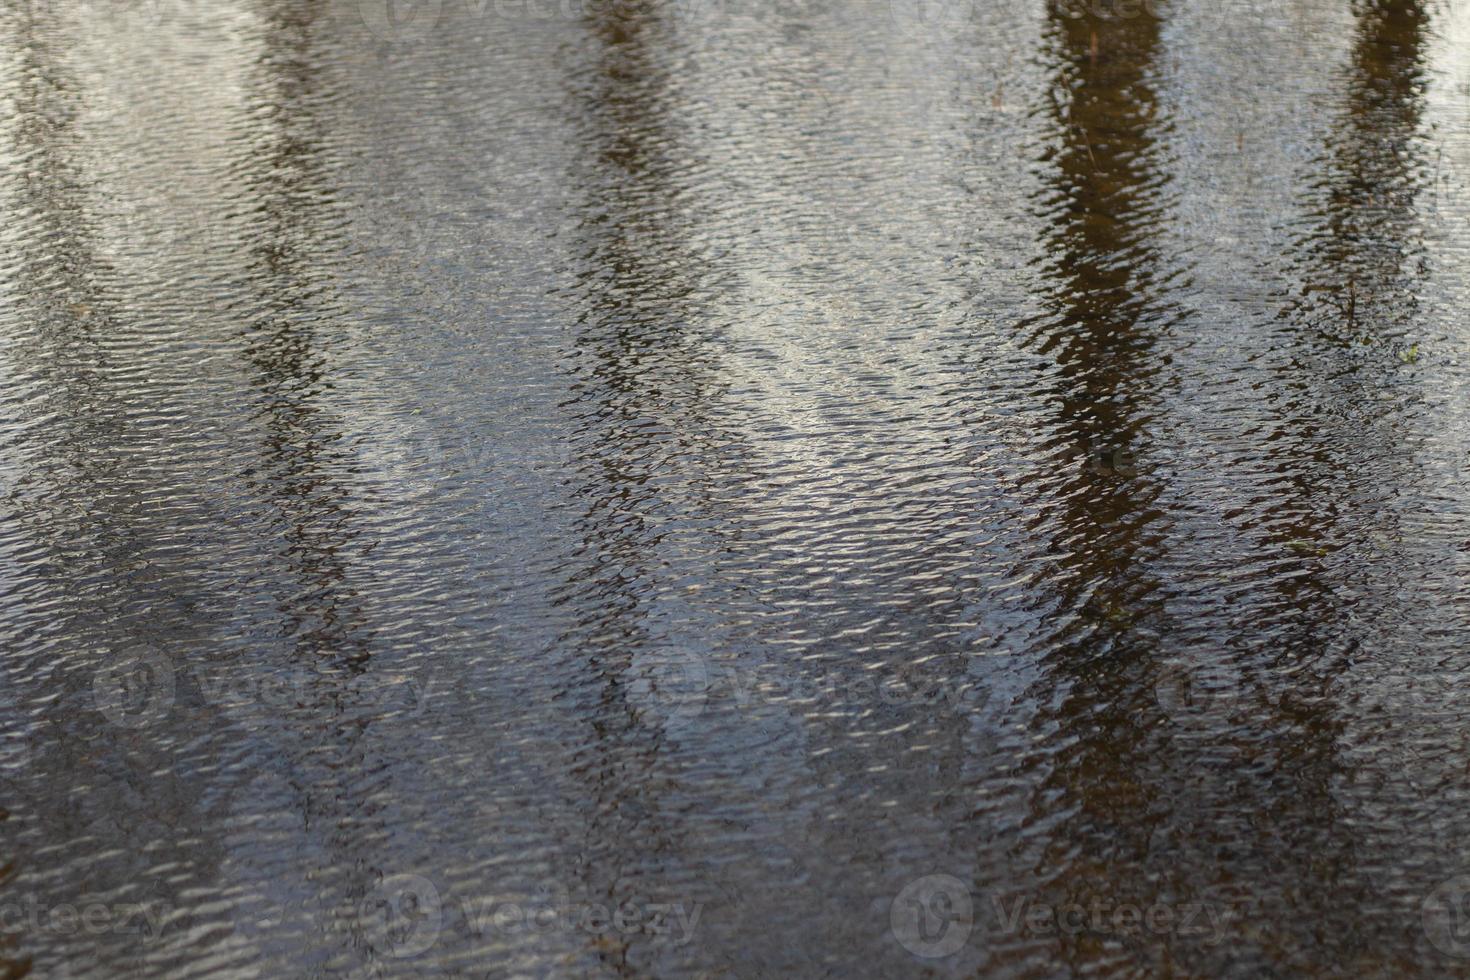 Waves on water. Wind on surface of water. Reflection in puddle. photo